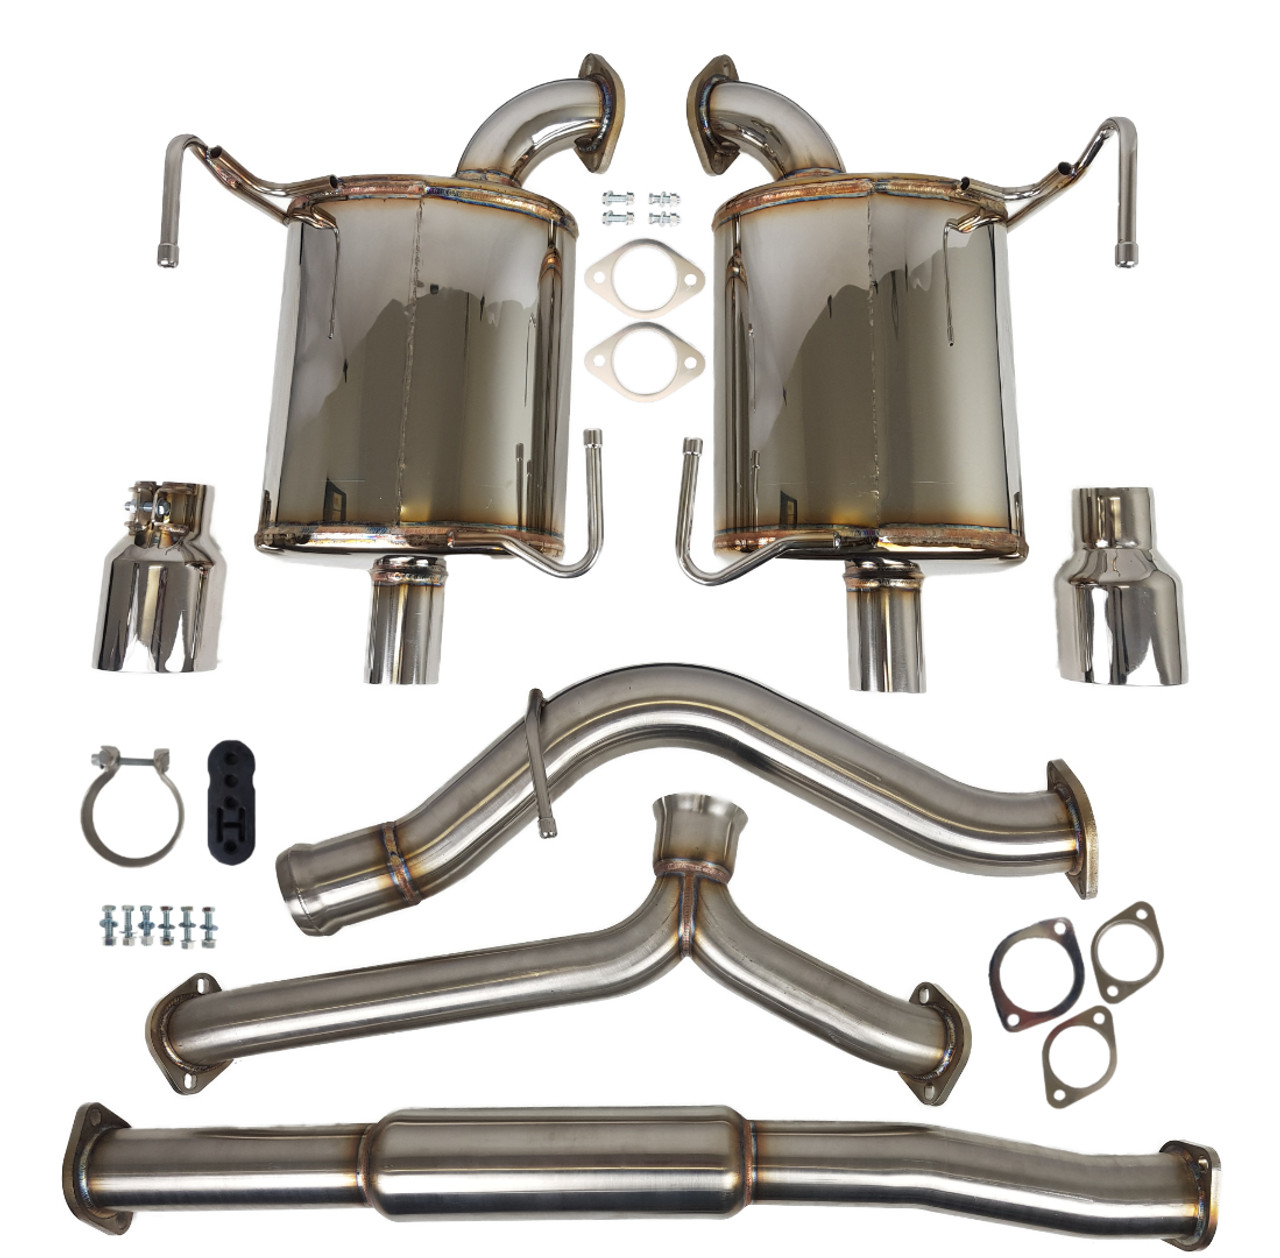 Forester XT 2014-2018 FA20F 2 1/2" Cat Back Exhaust Kit